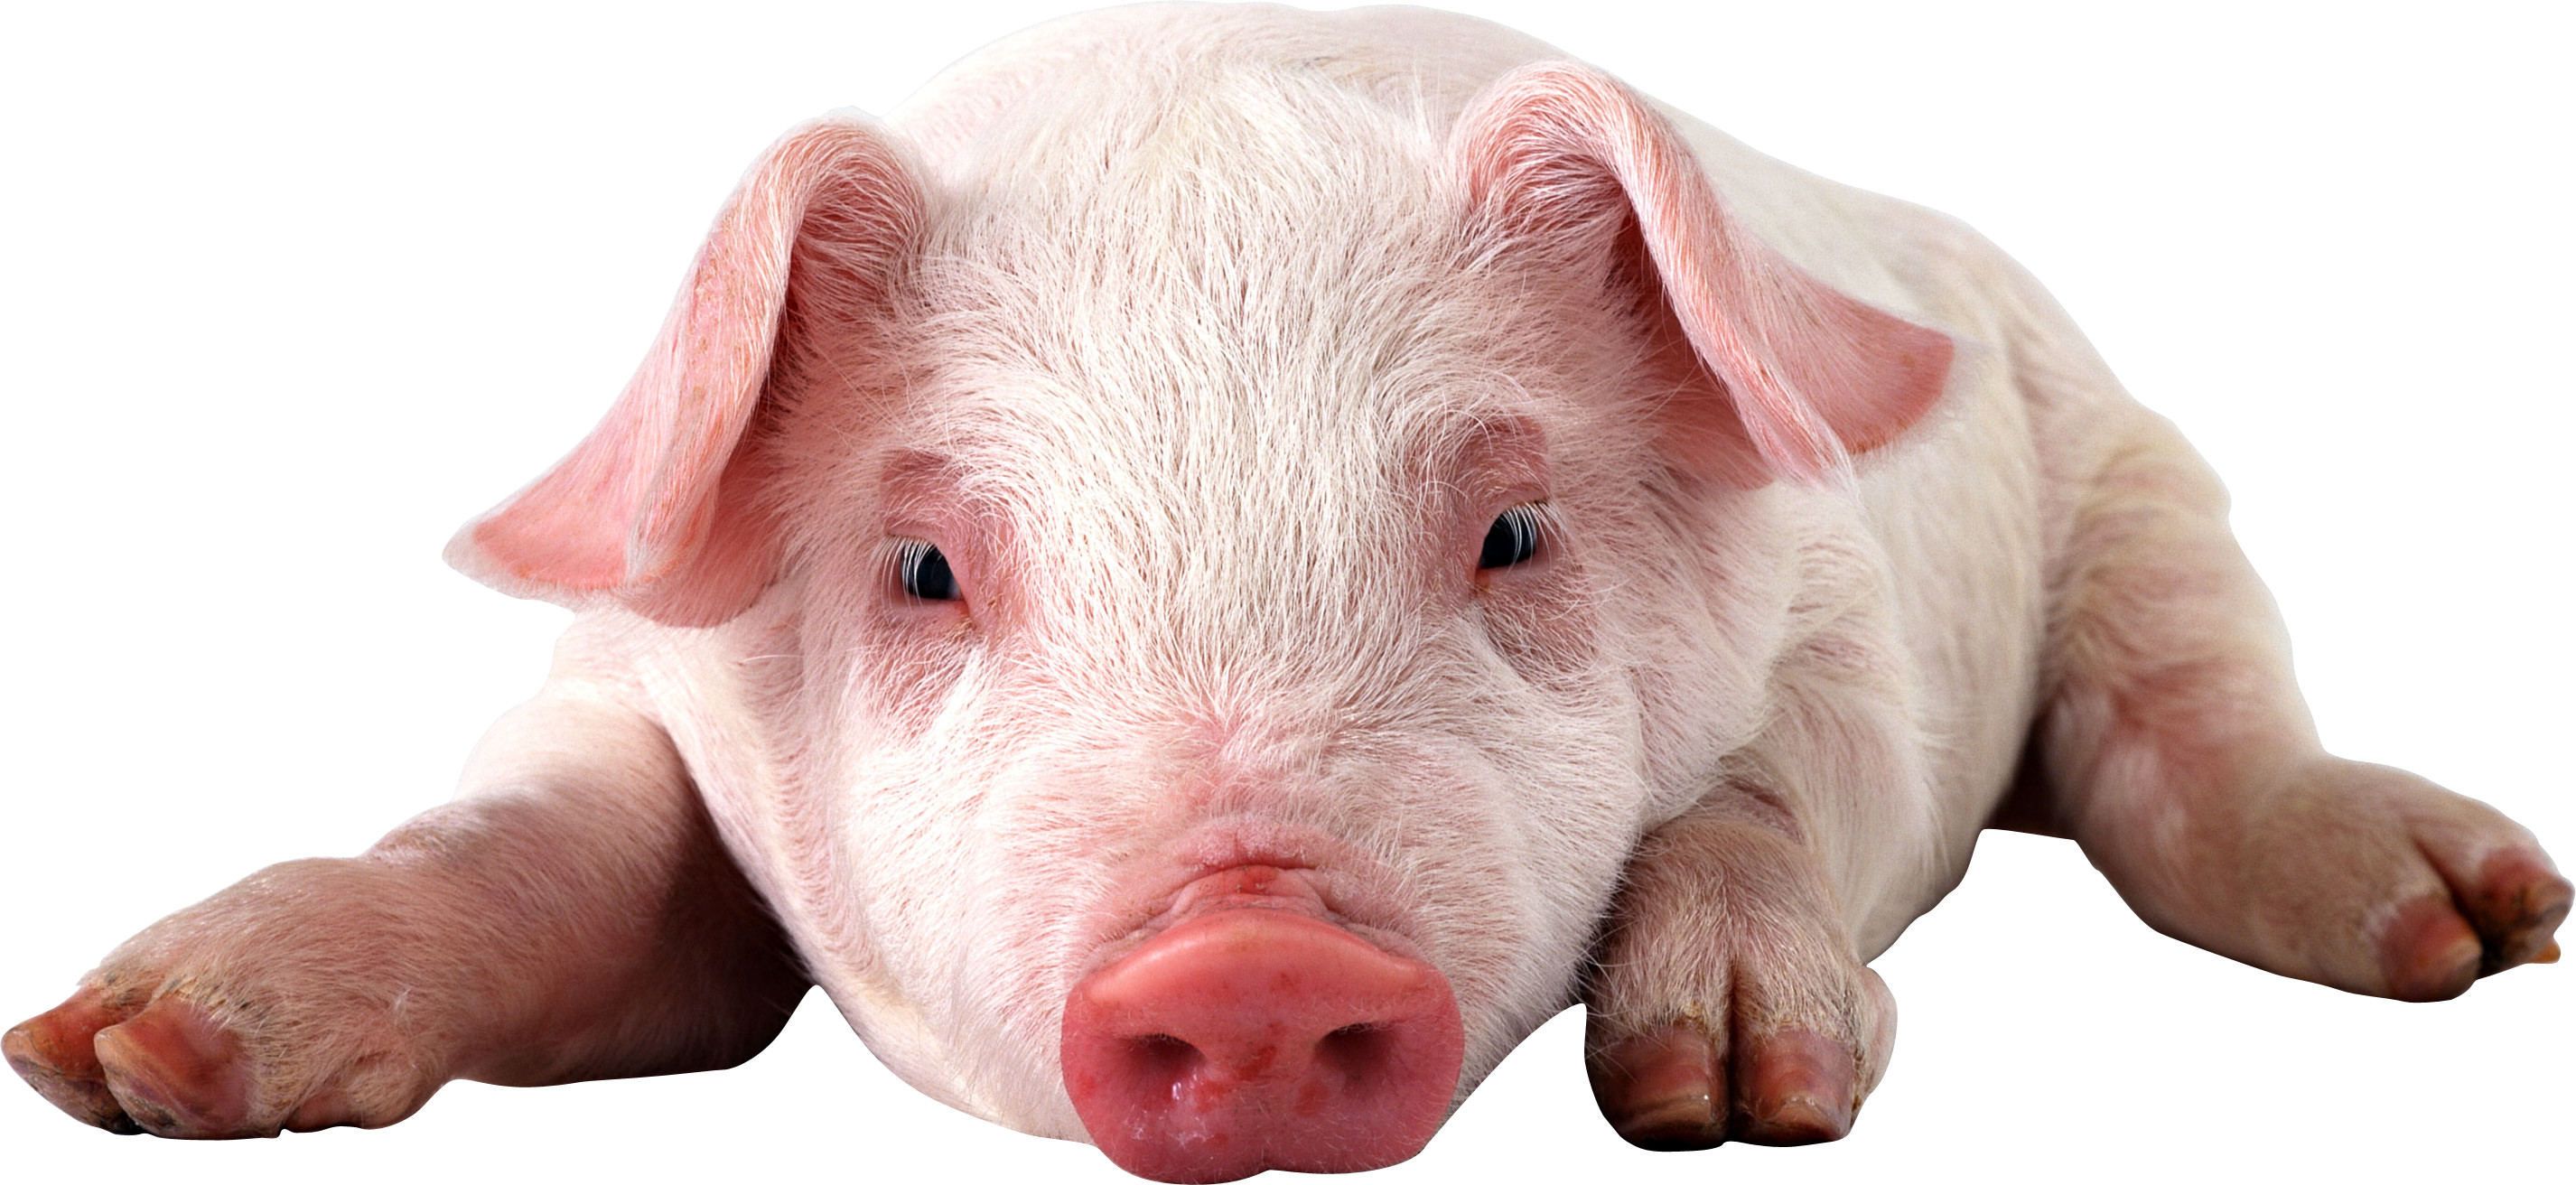 2852x1312 ... pig png images free picture download pigs ...